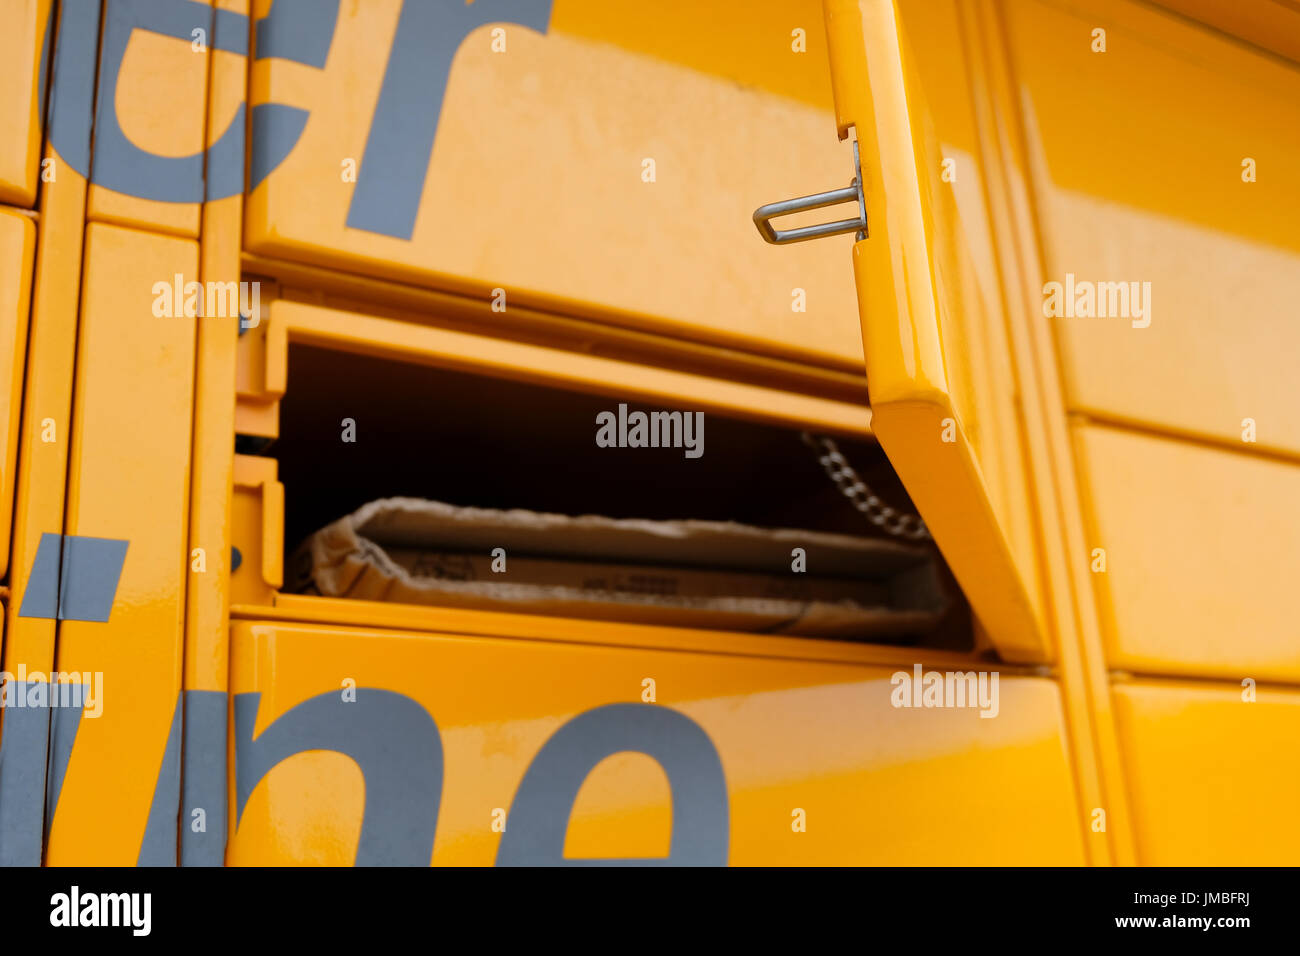 Door to bright yellow Amazon Locker called Binky opened after input of collection code allowing access to parcel Stock Photo